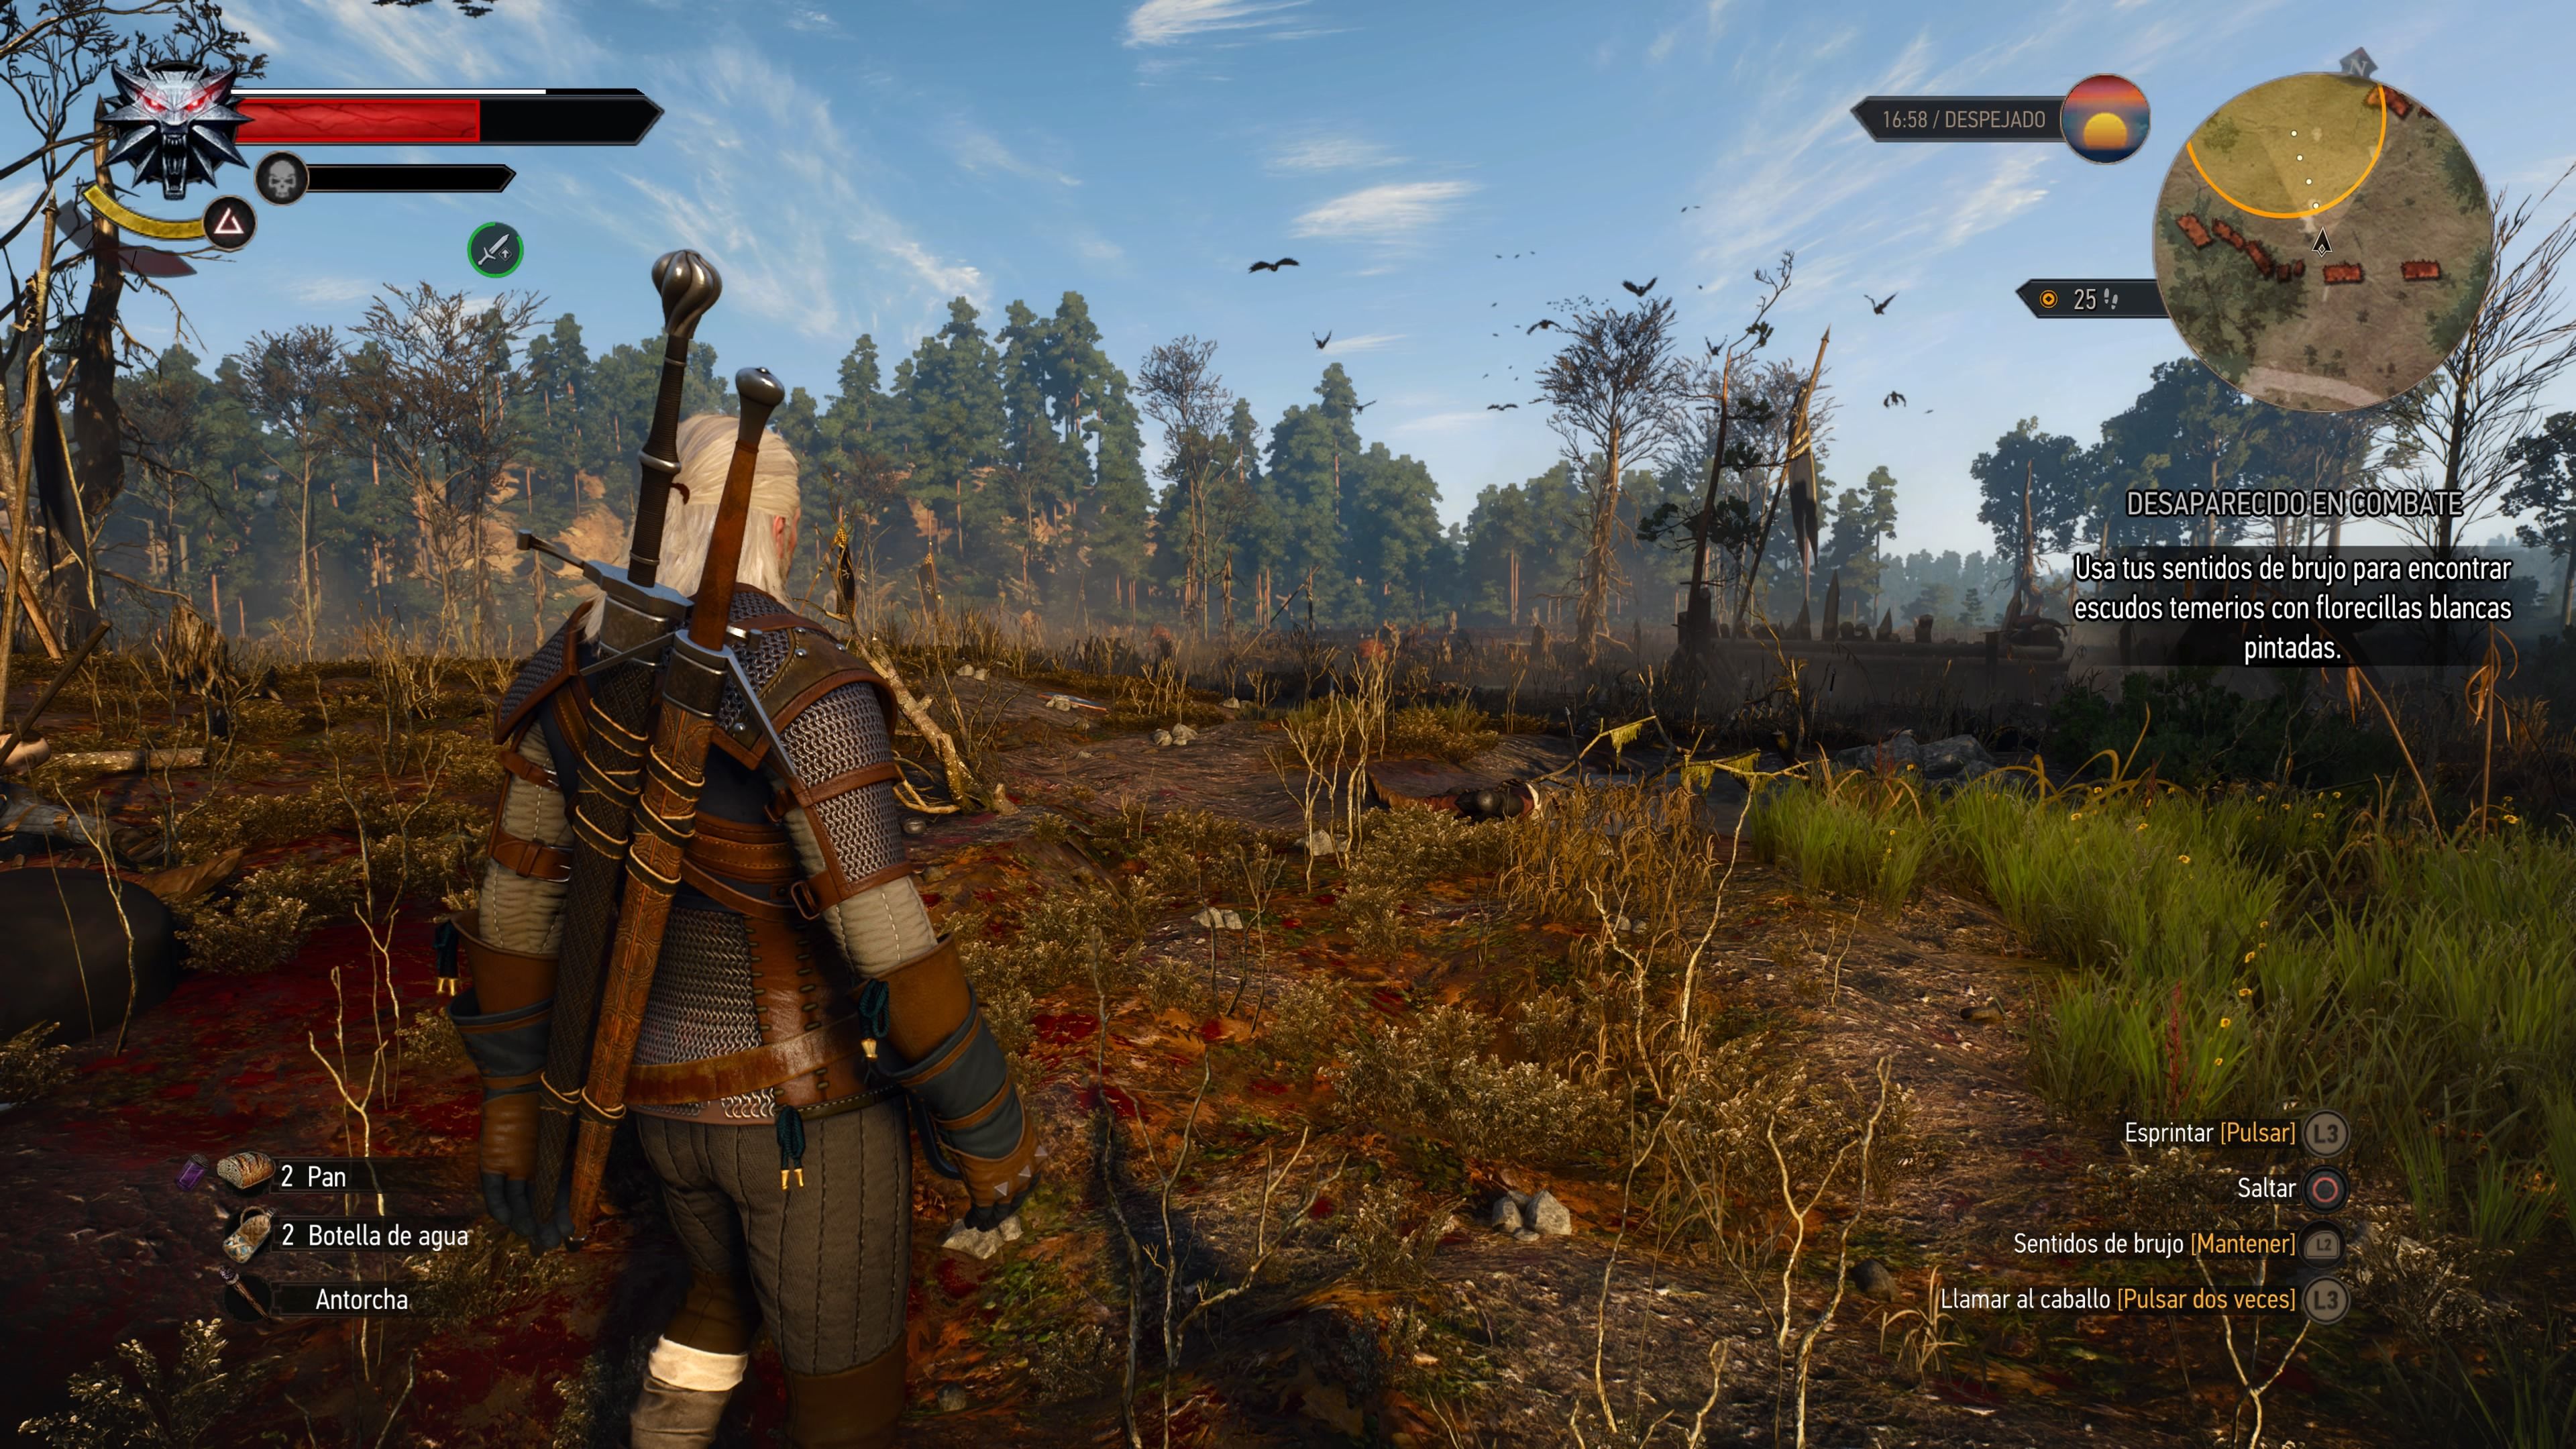 PS5 0KM CON LECTORA + THE WITCHER 3 — Martín Games